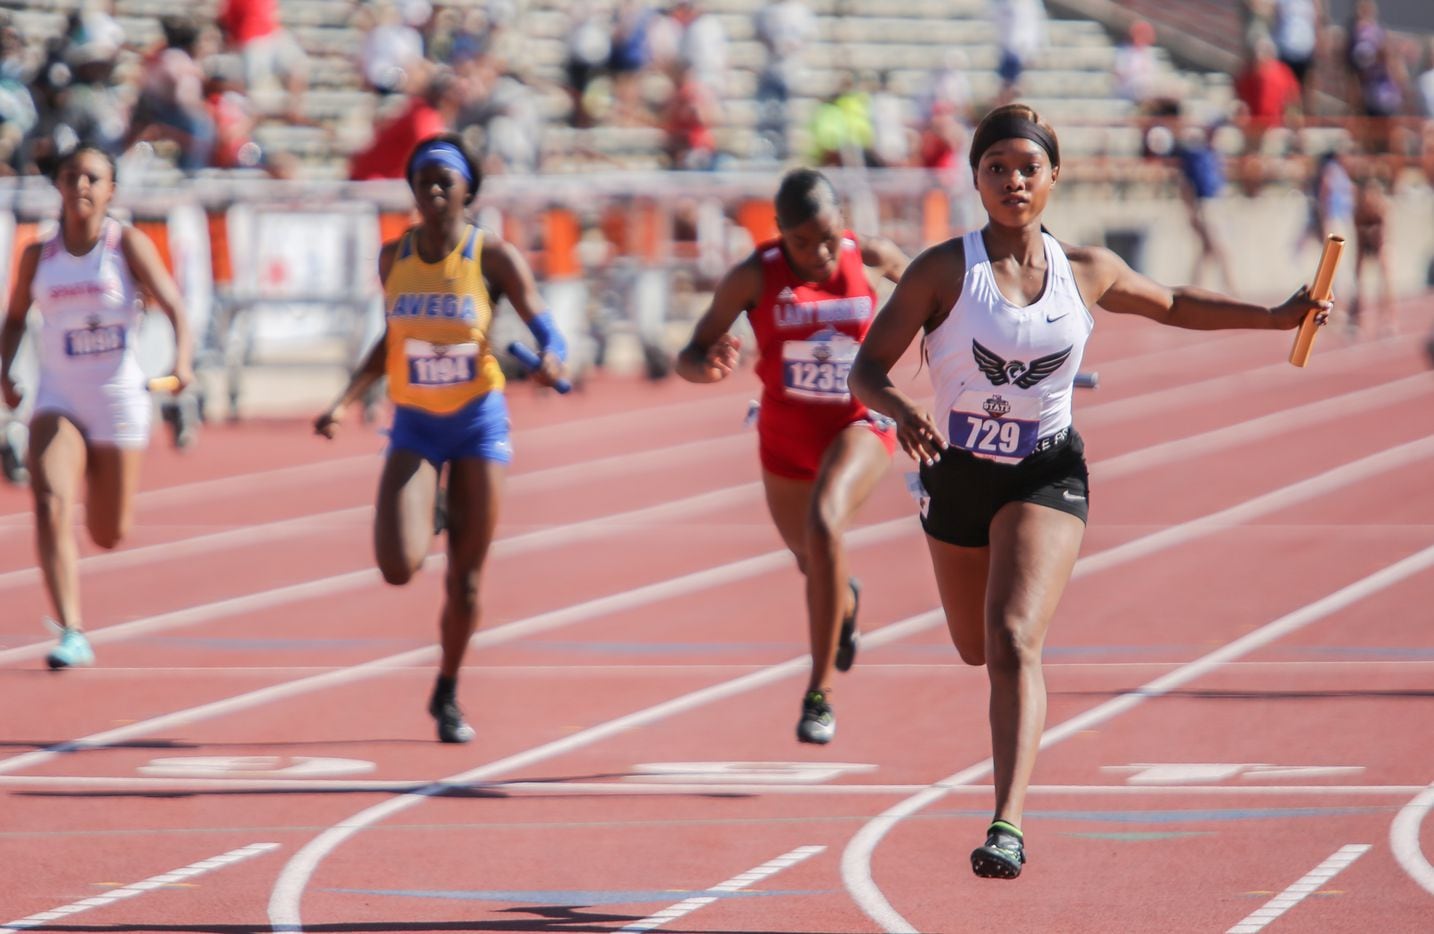 Kennedale's Brianna Brand crosses the finish line during their 4A girls 4x100 relay at the UIL state track meet at the Mike A. Myers Stadium, at the University of Texas on May 6, 2021 in Austin, Texas.